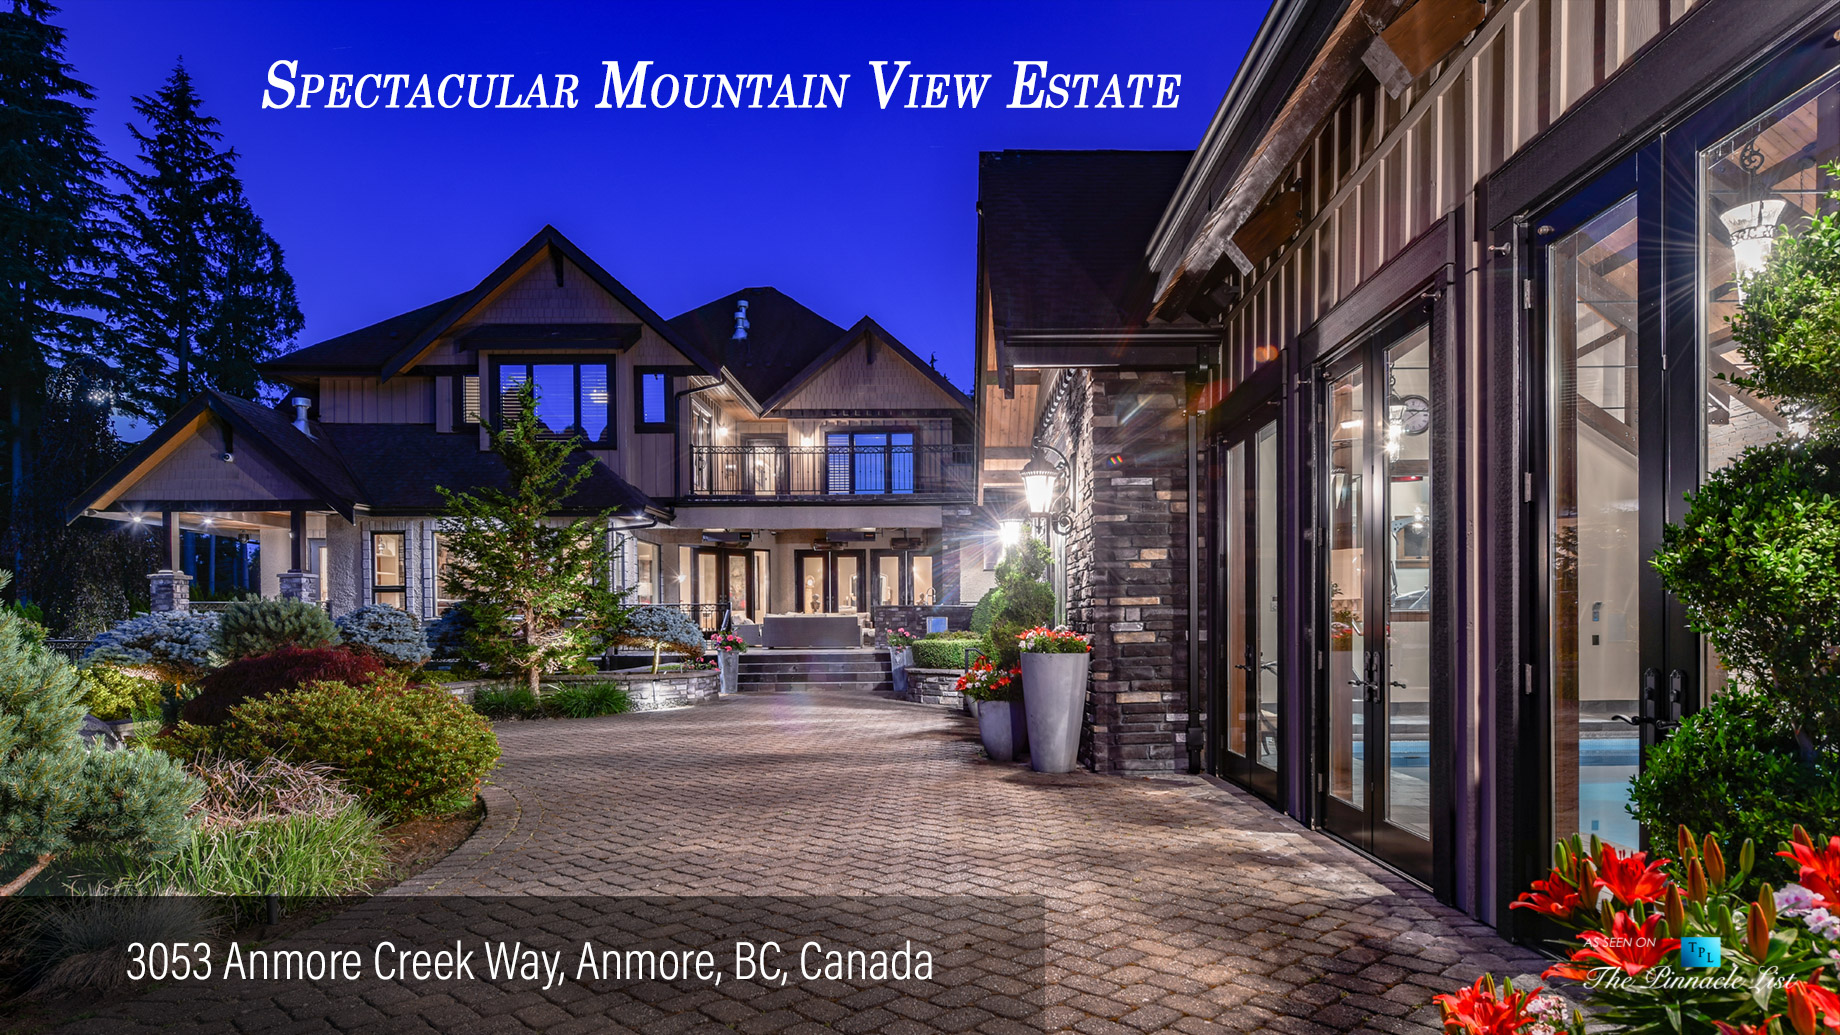 Spectacular Mountain View Estate – 3053 Anmore Creek Way, Anmore, BC, Canada